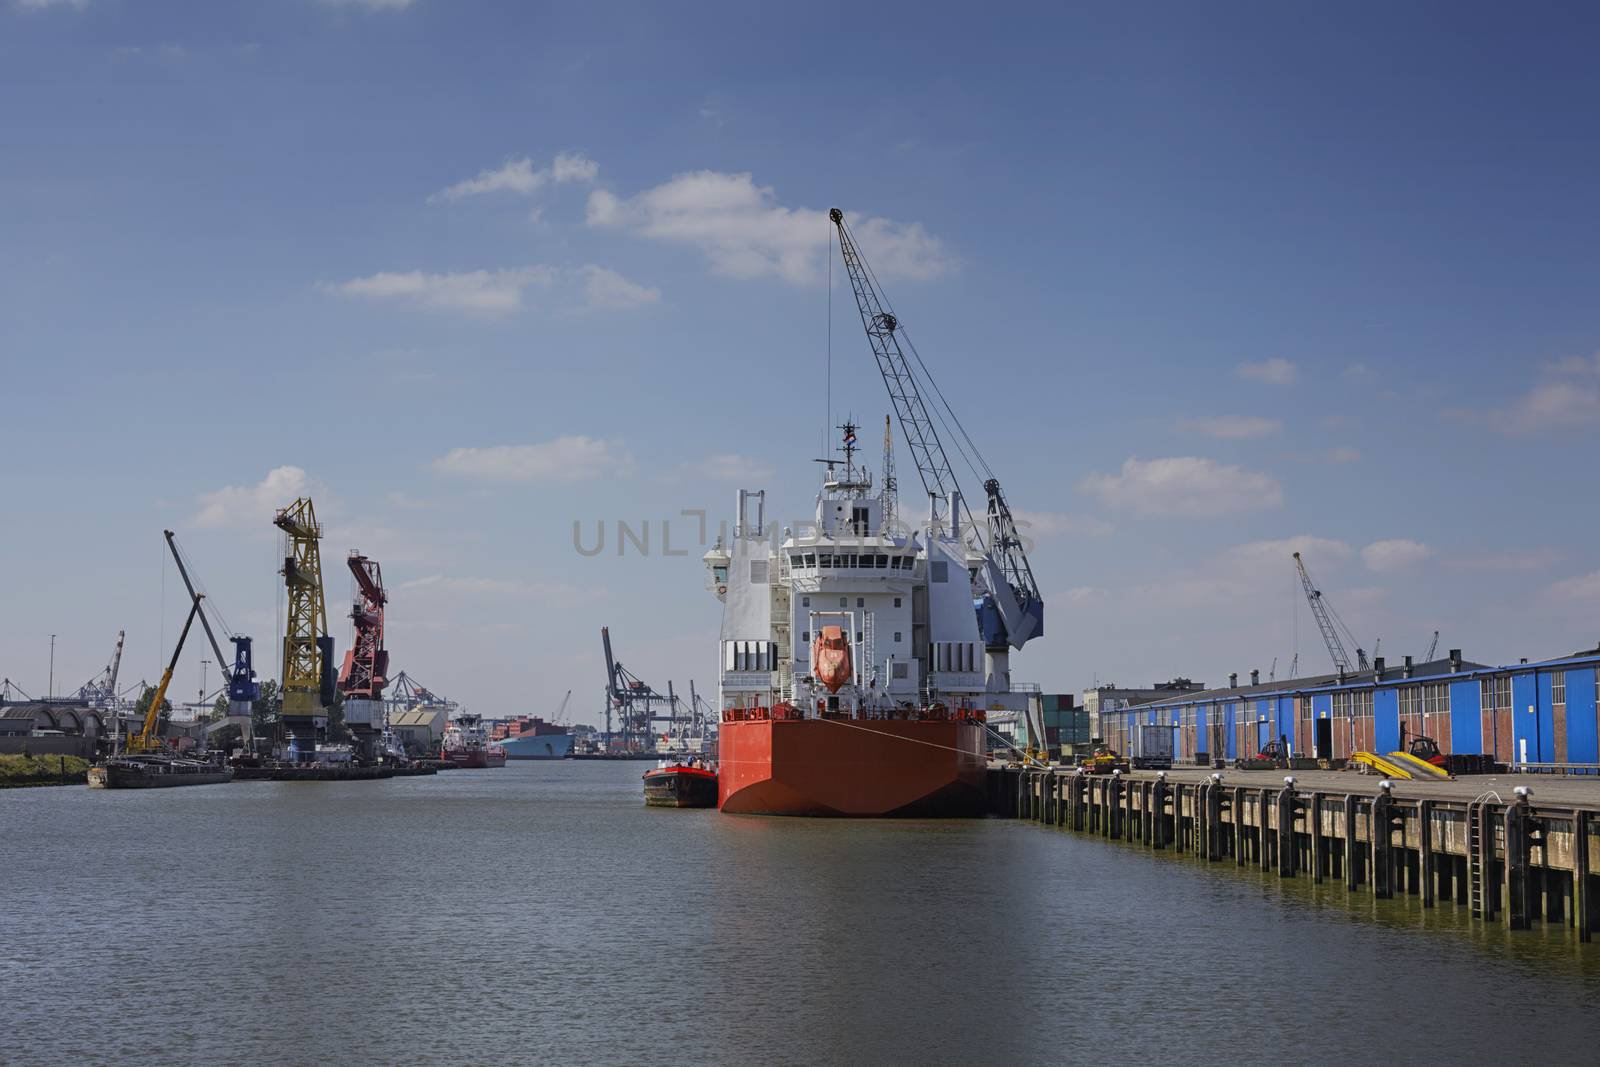 industrial ship with a life boat at a sunny day get unloaded in the port of rotterdam by janssenkruseproductions